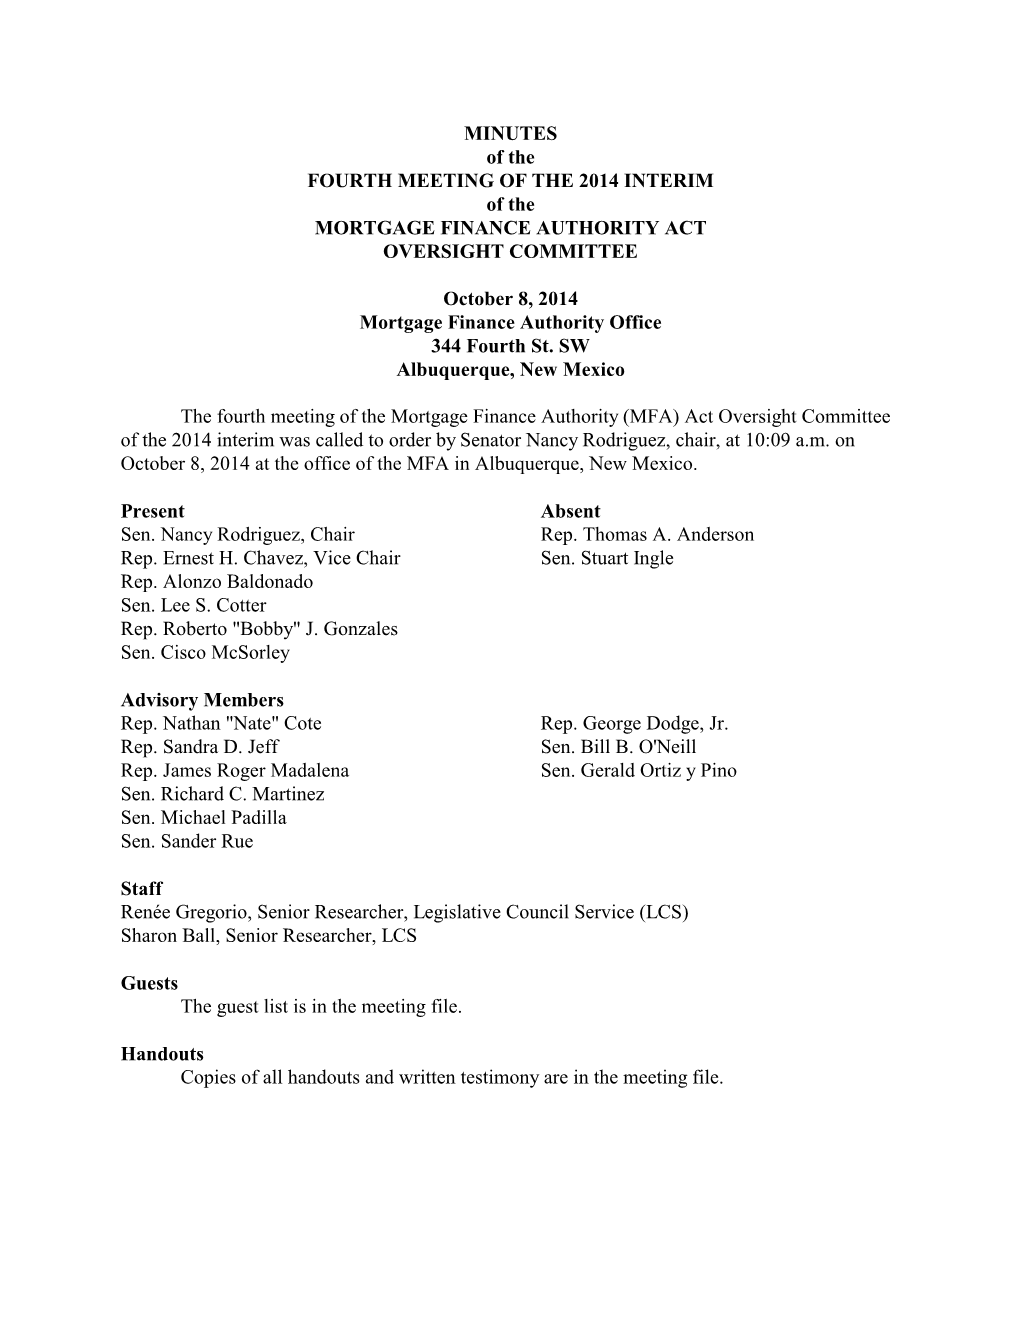 MINUTES of the FOURTH MEETING of the 2014 INTERIM of the MORTGAGE FINANCE AUTHORITY ACT OVERSIGHT COMMITTEE